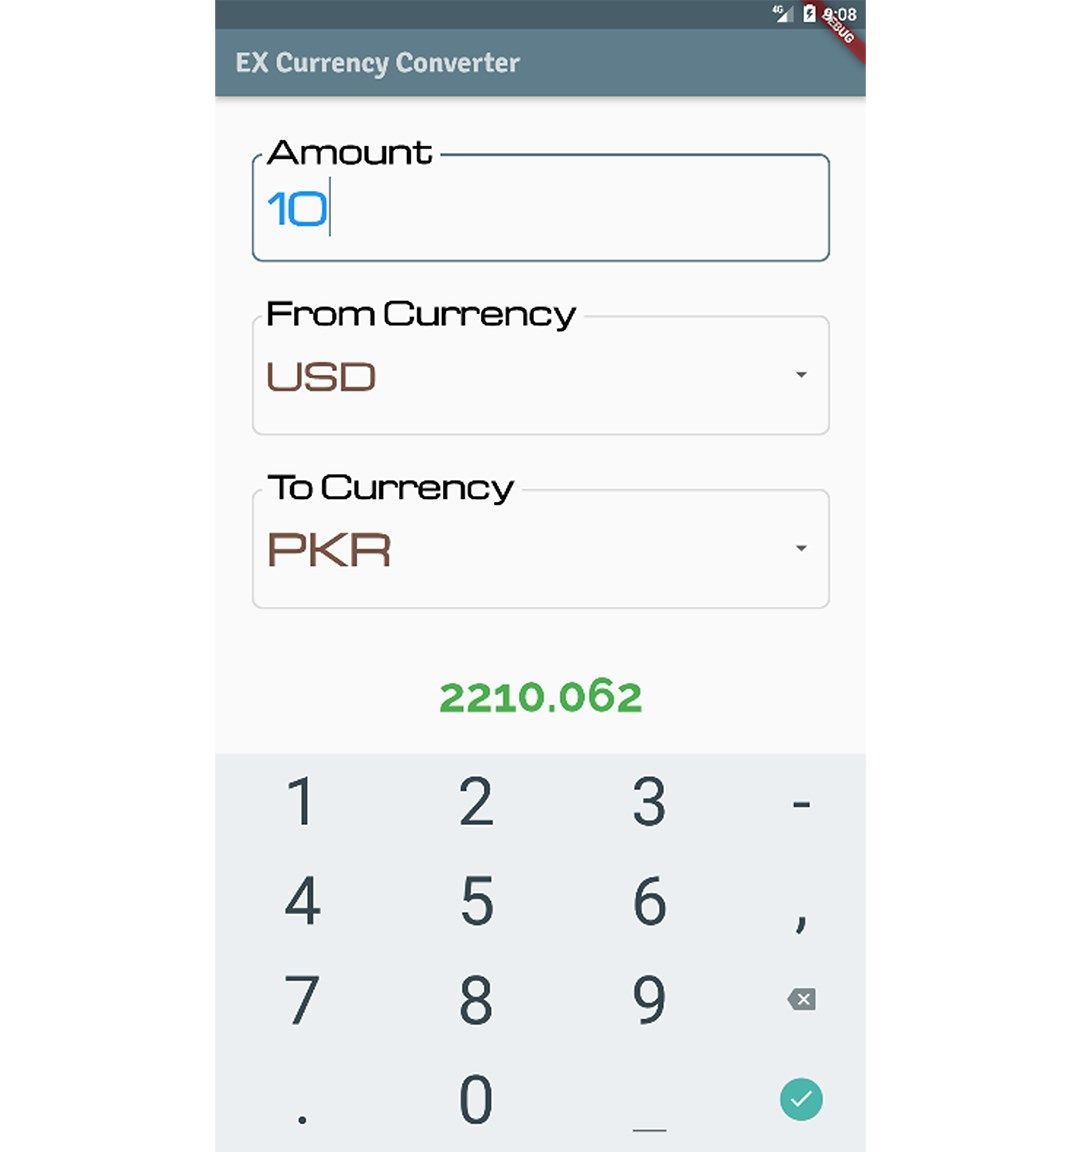 EX Currency Converter